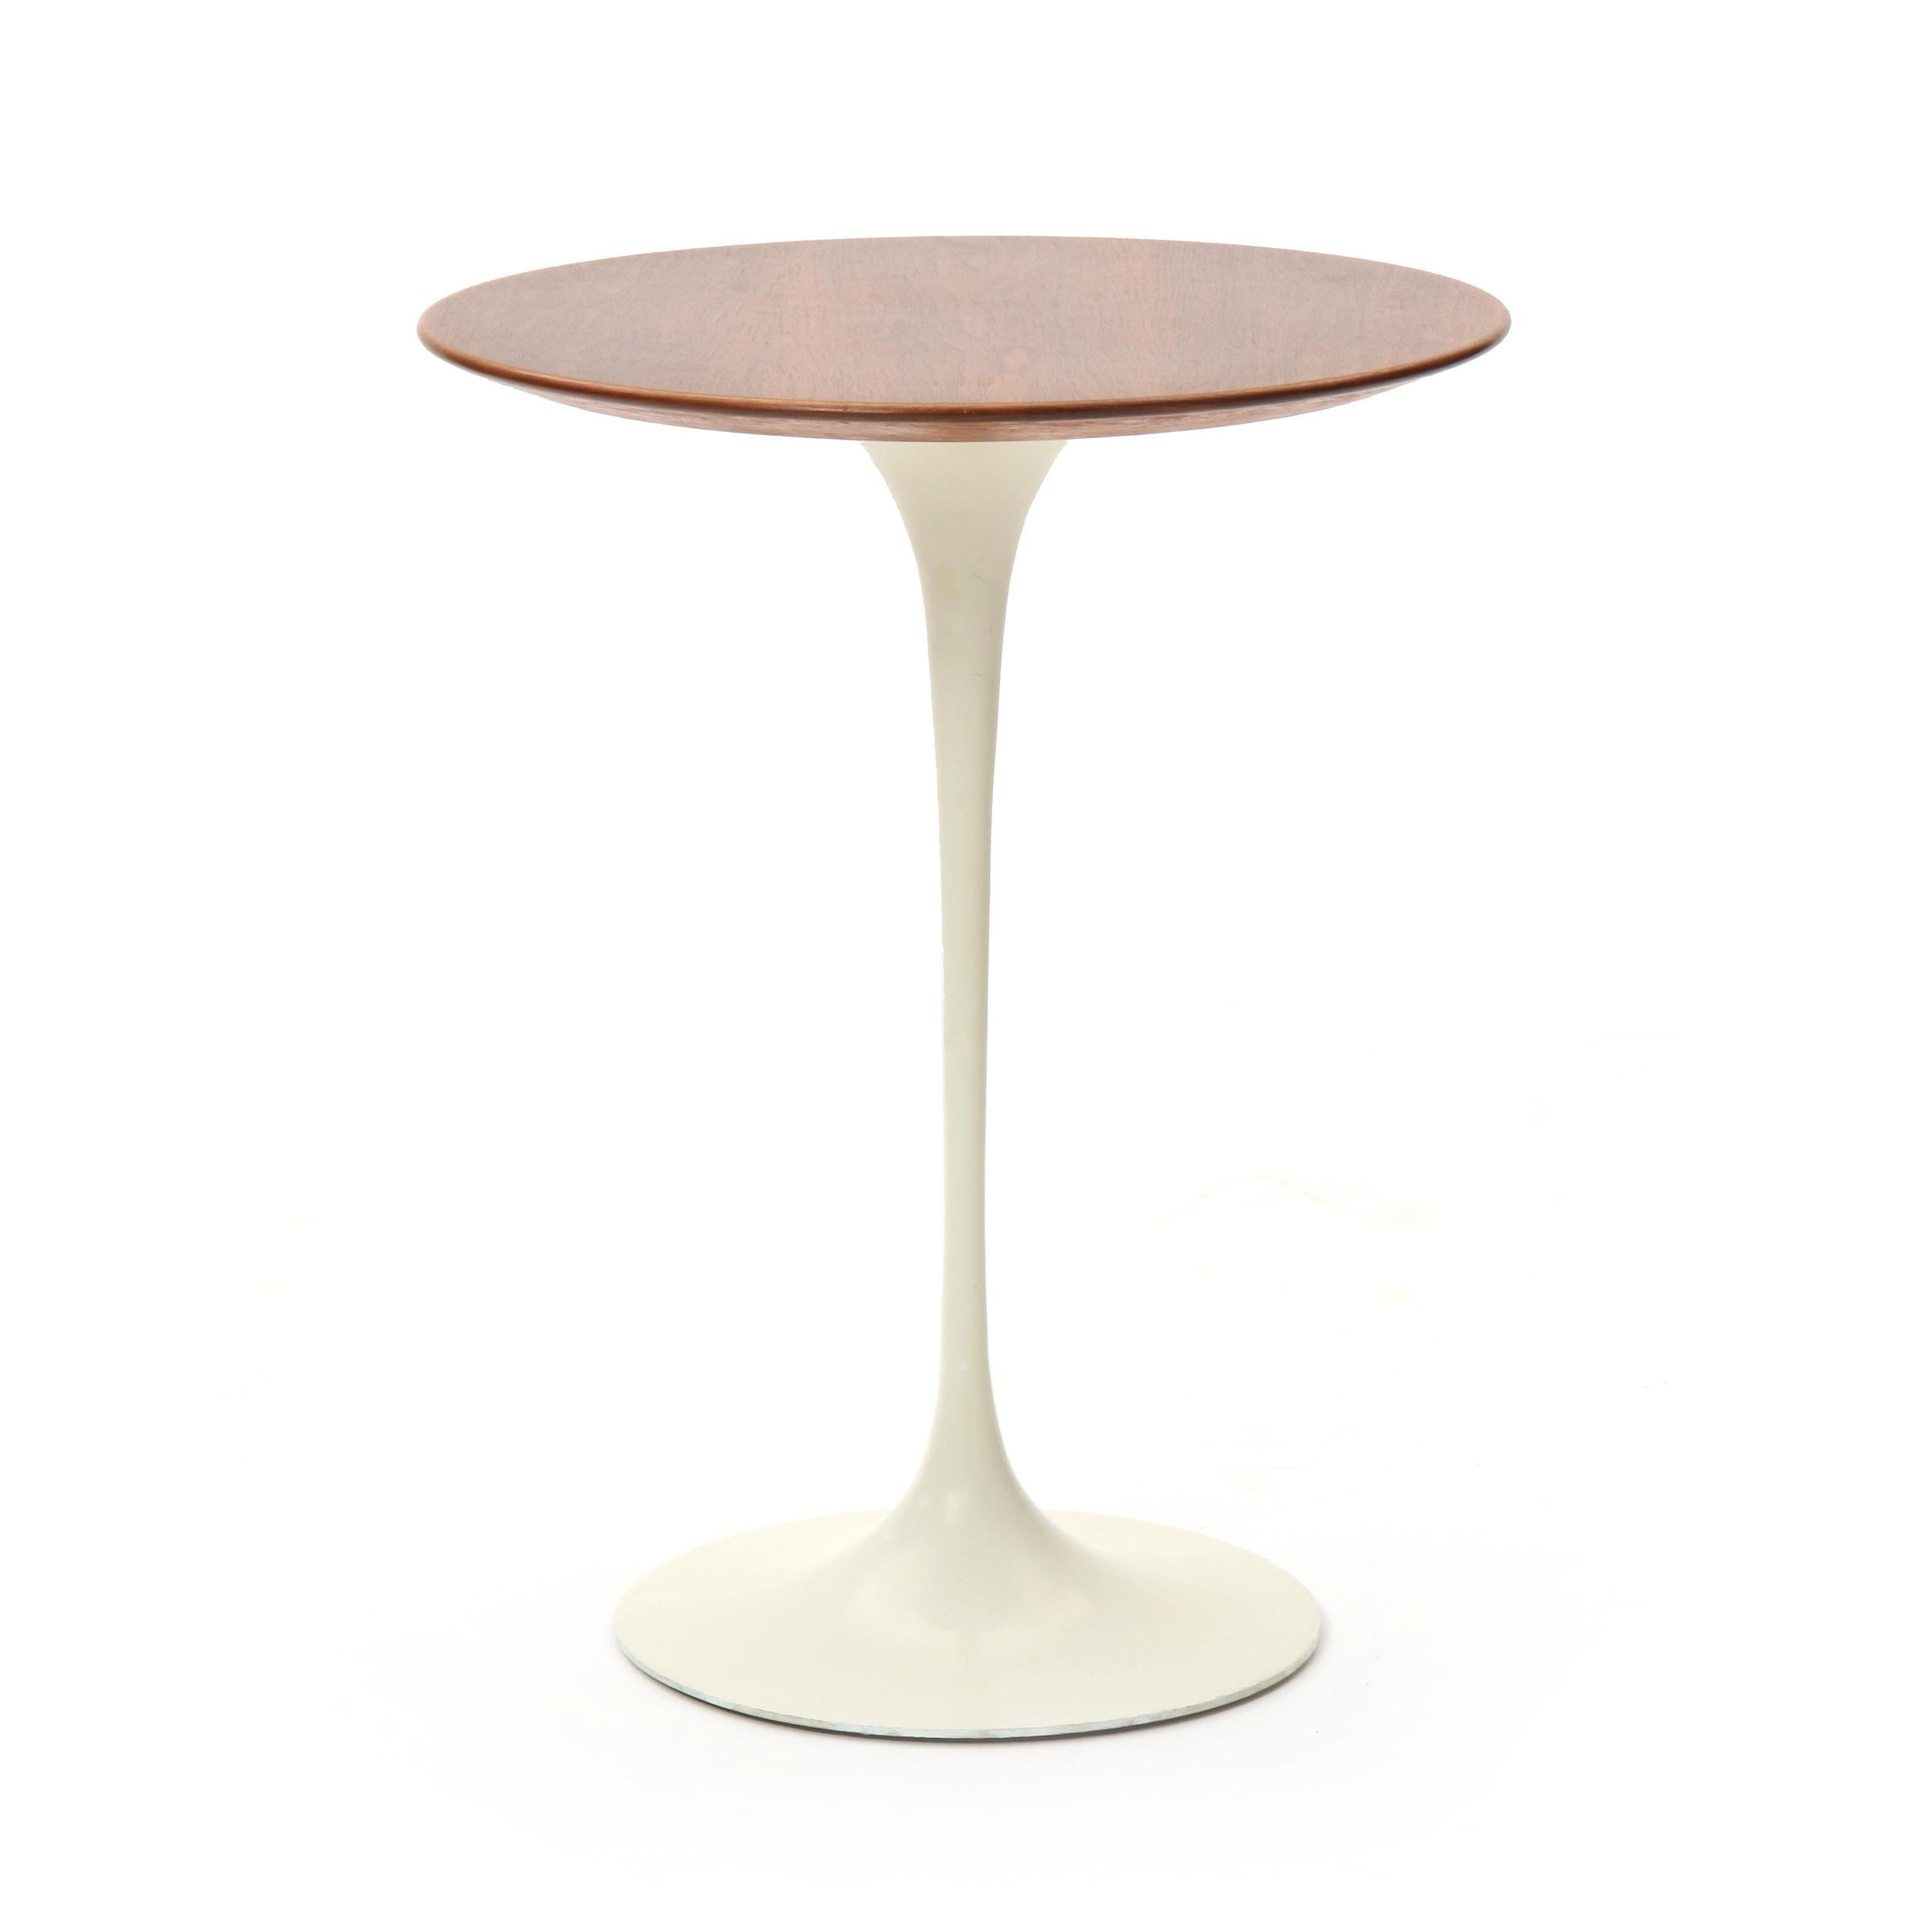 A circular end table with the original walnut veneer top and white cast iron pedestal base.